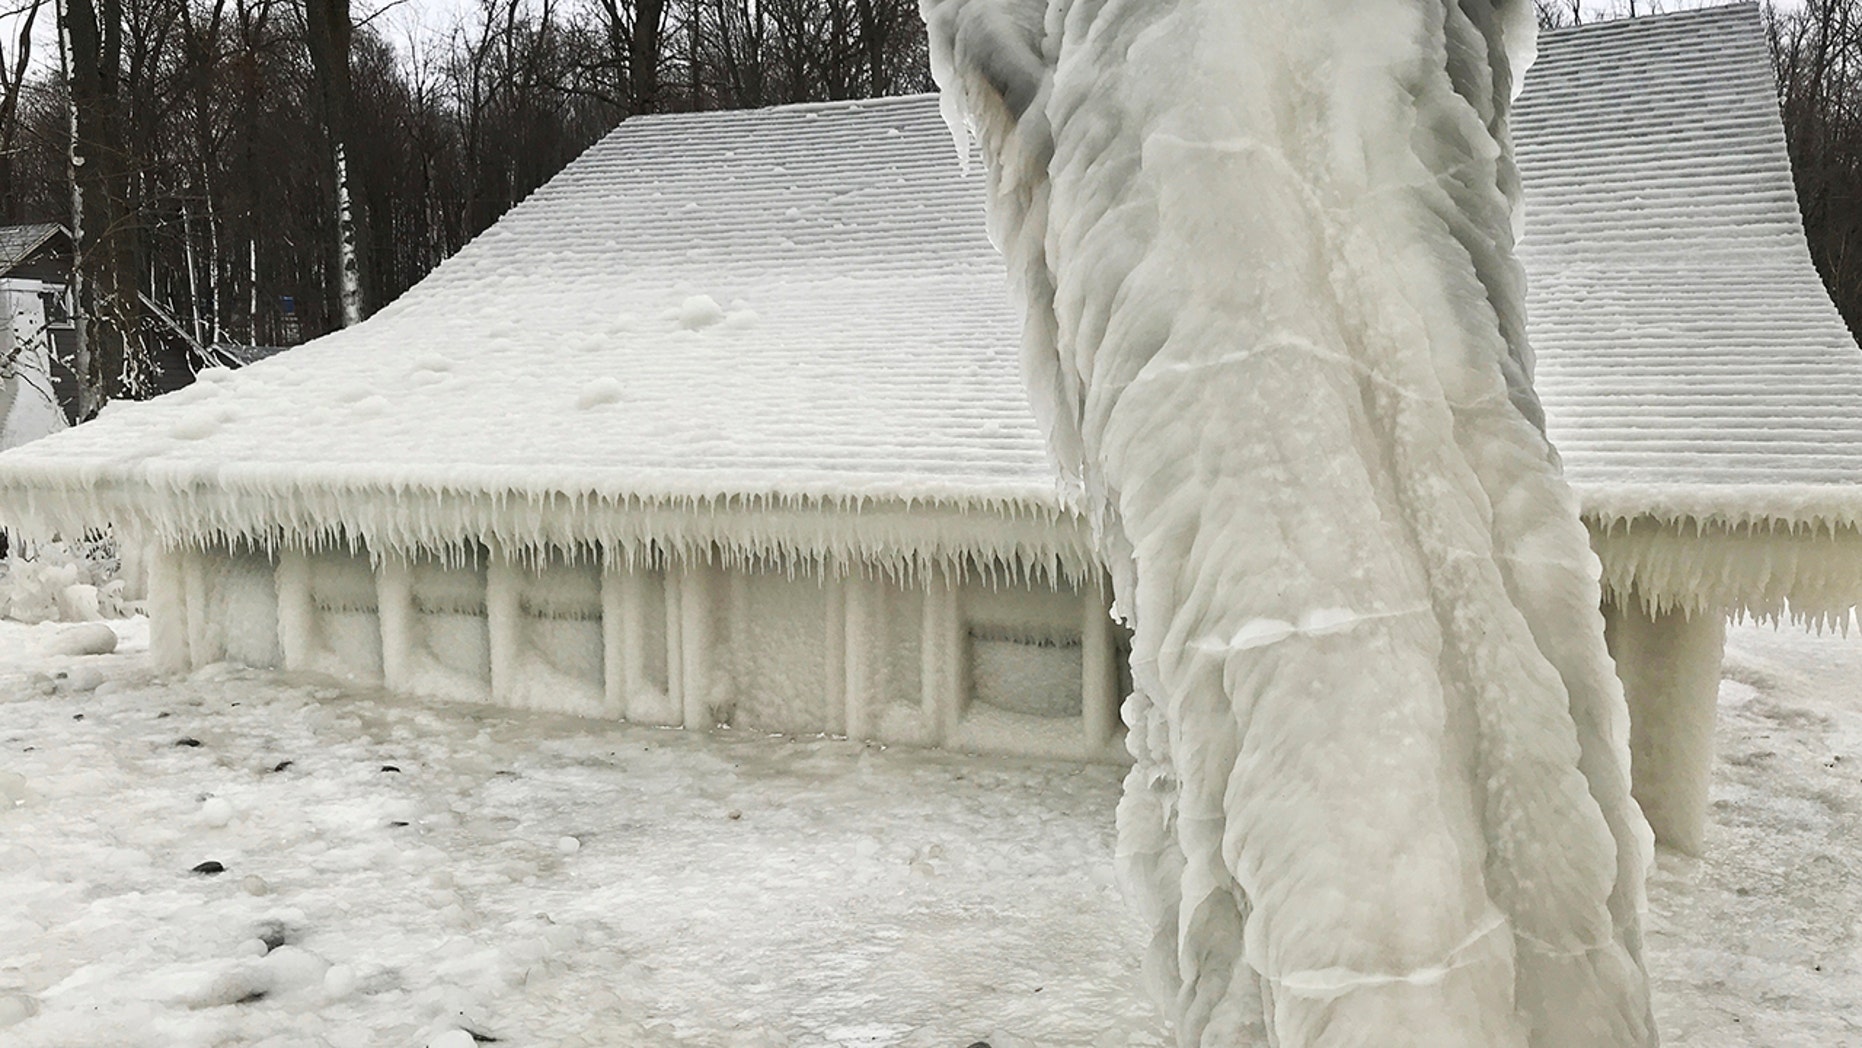 A house is covered in ice near the edge of Lake Ontario in Pulaski, N.Y., on Wednesday, Feb. 27, 2019. Starting over the weekend, wind gusts of up to 70 mph caused freezing spray from the lake to wrap nearby summer homes in ice as high winds howled through much of the eastern U.S. [Natalie Kucko via AP)